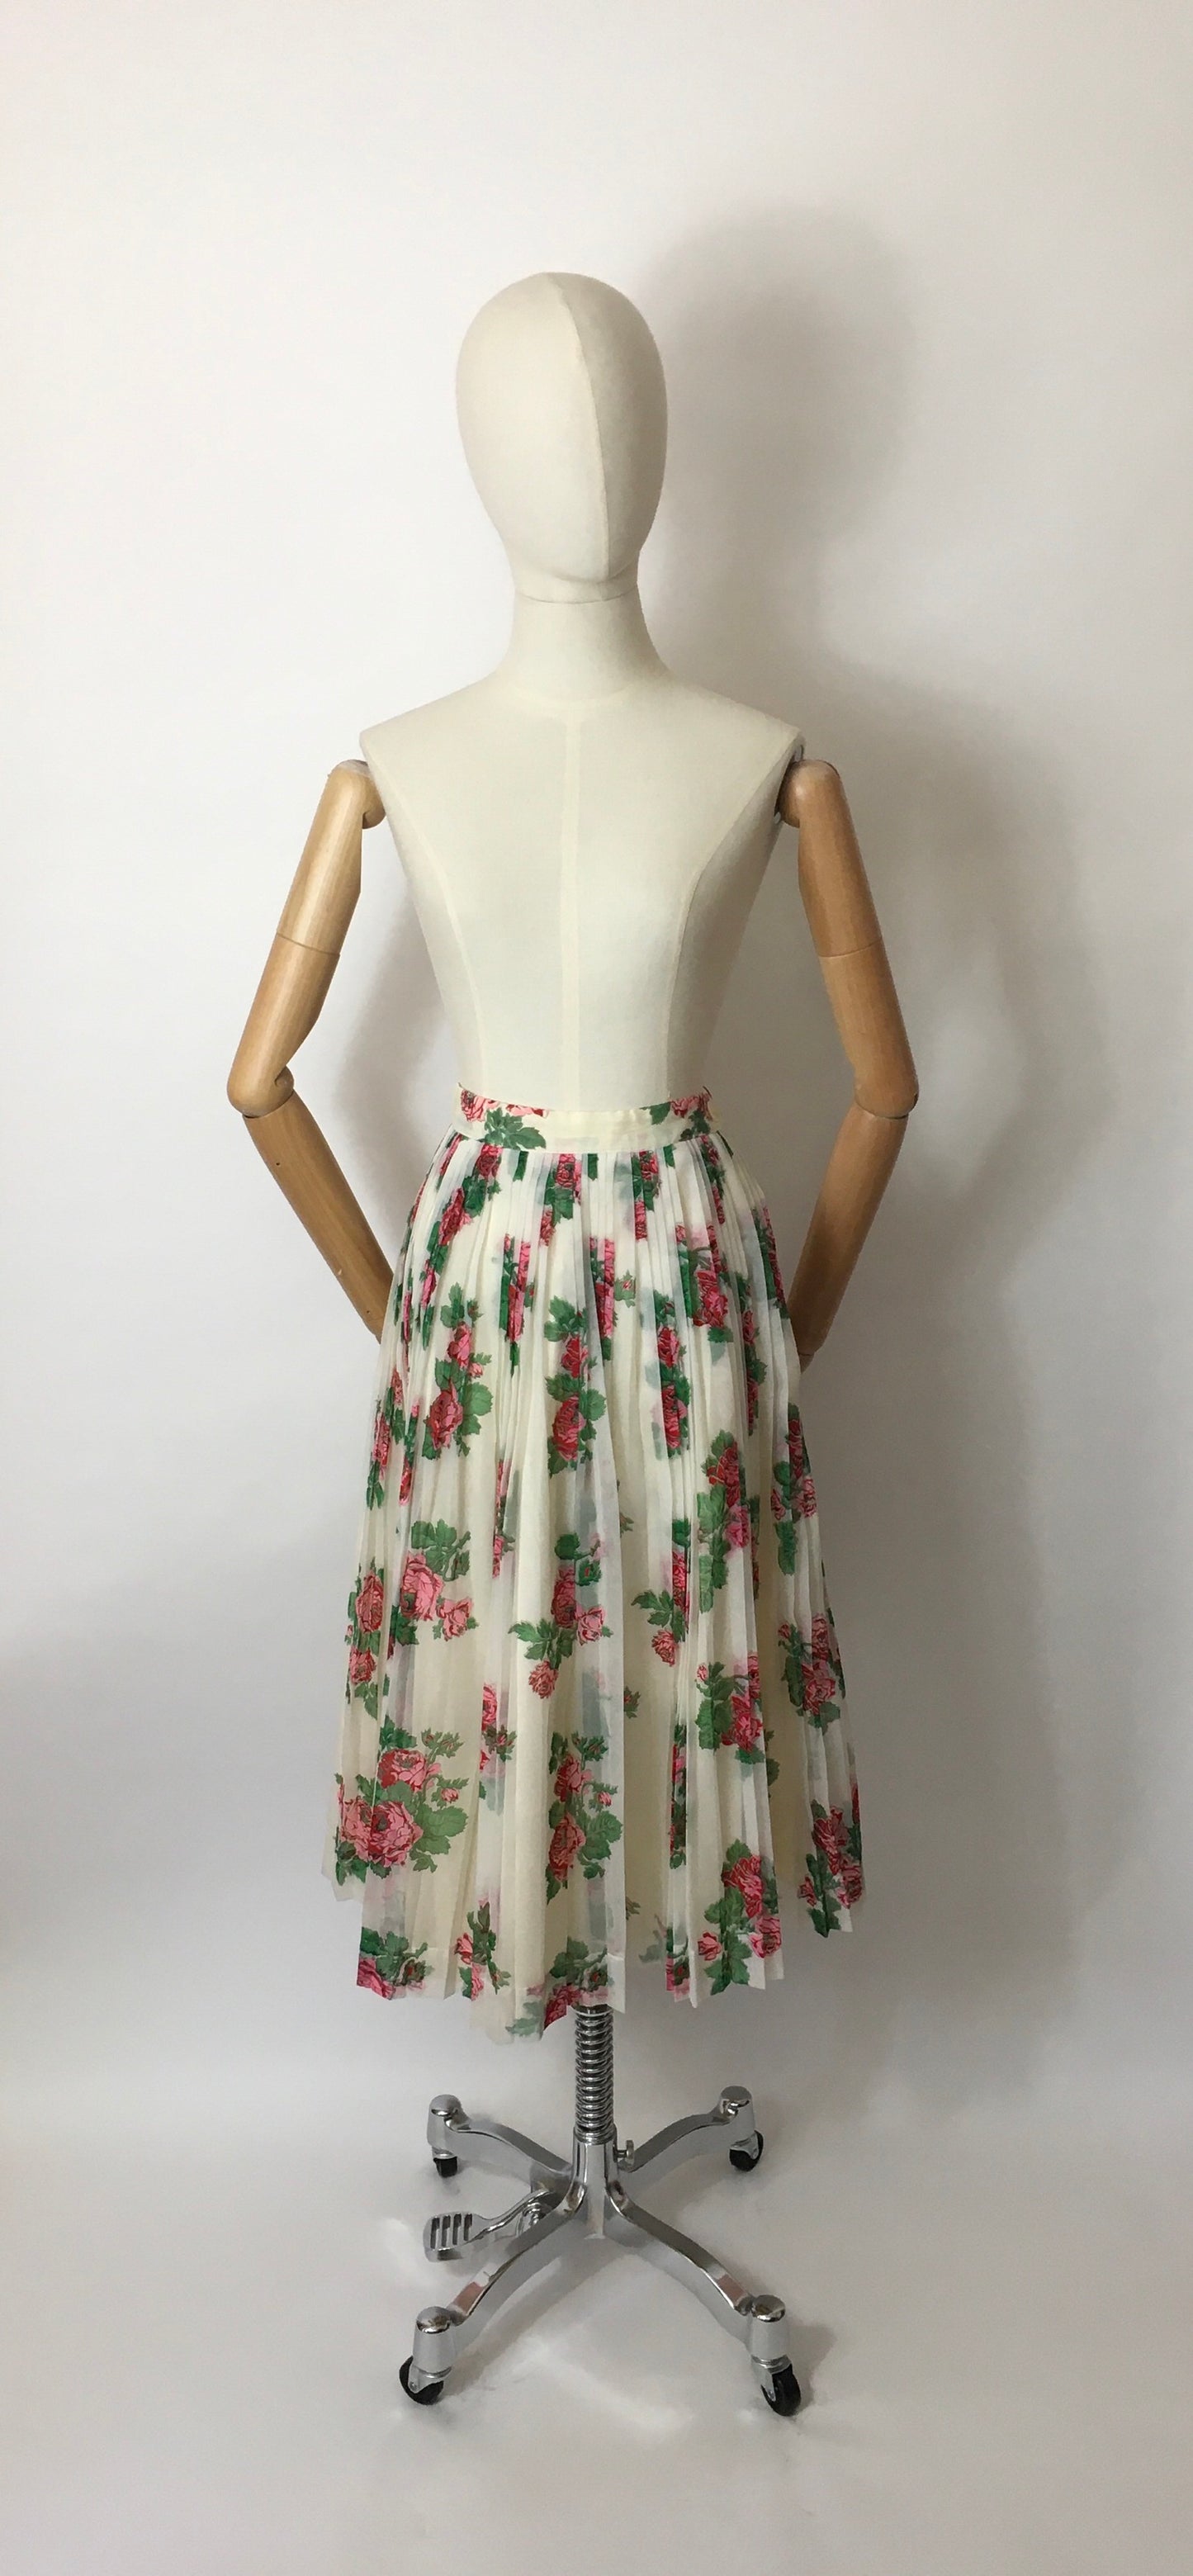 Original 1950’s Pleated Skirt - In A Darling Pink Floral